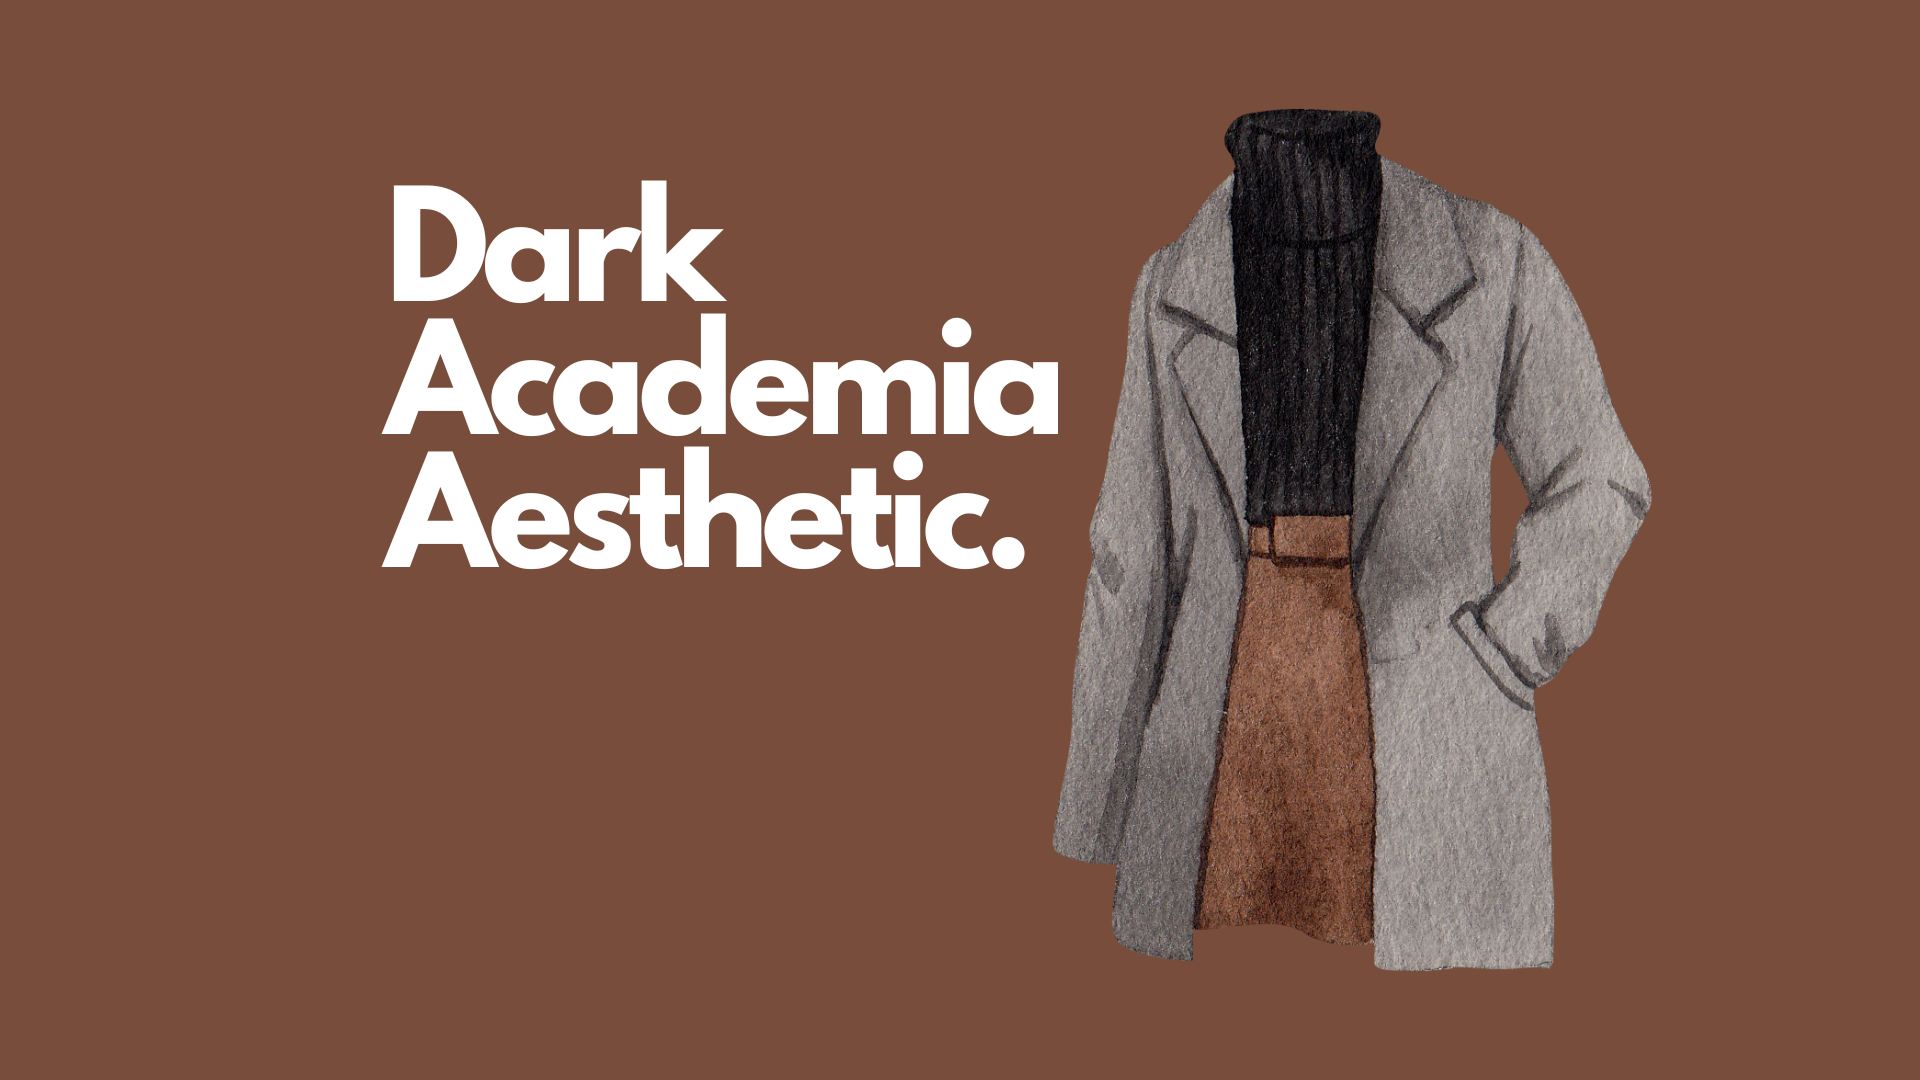 Dark Academia Clothing and Outfits - Penny Pincher Fashion